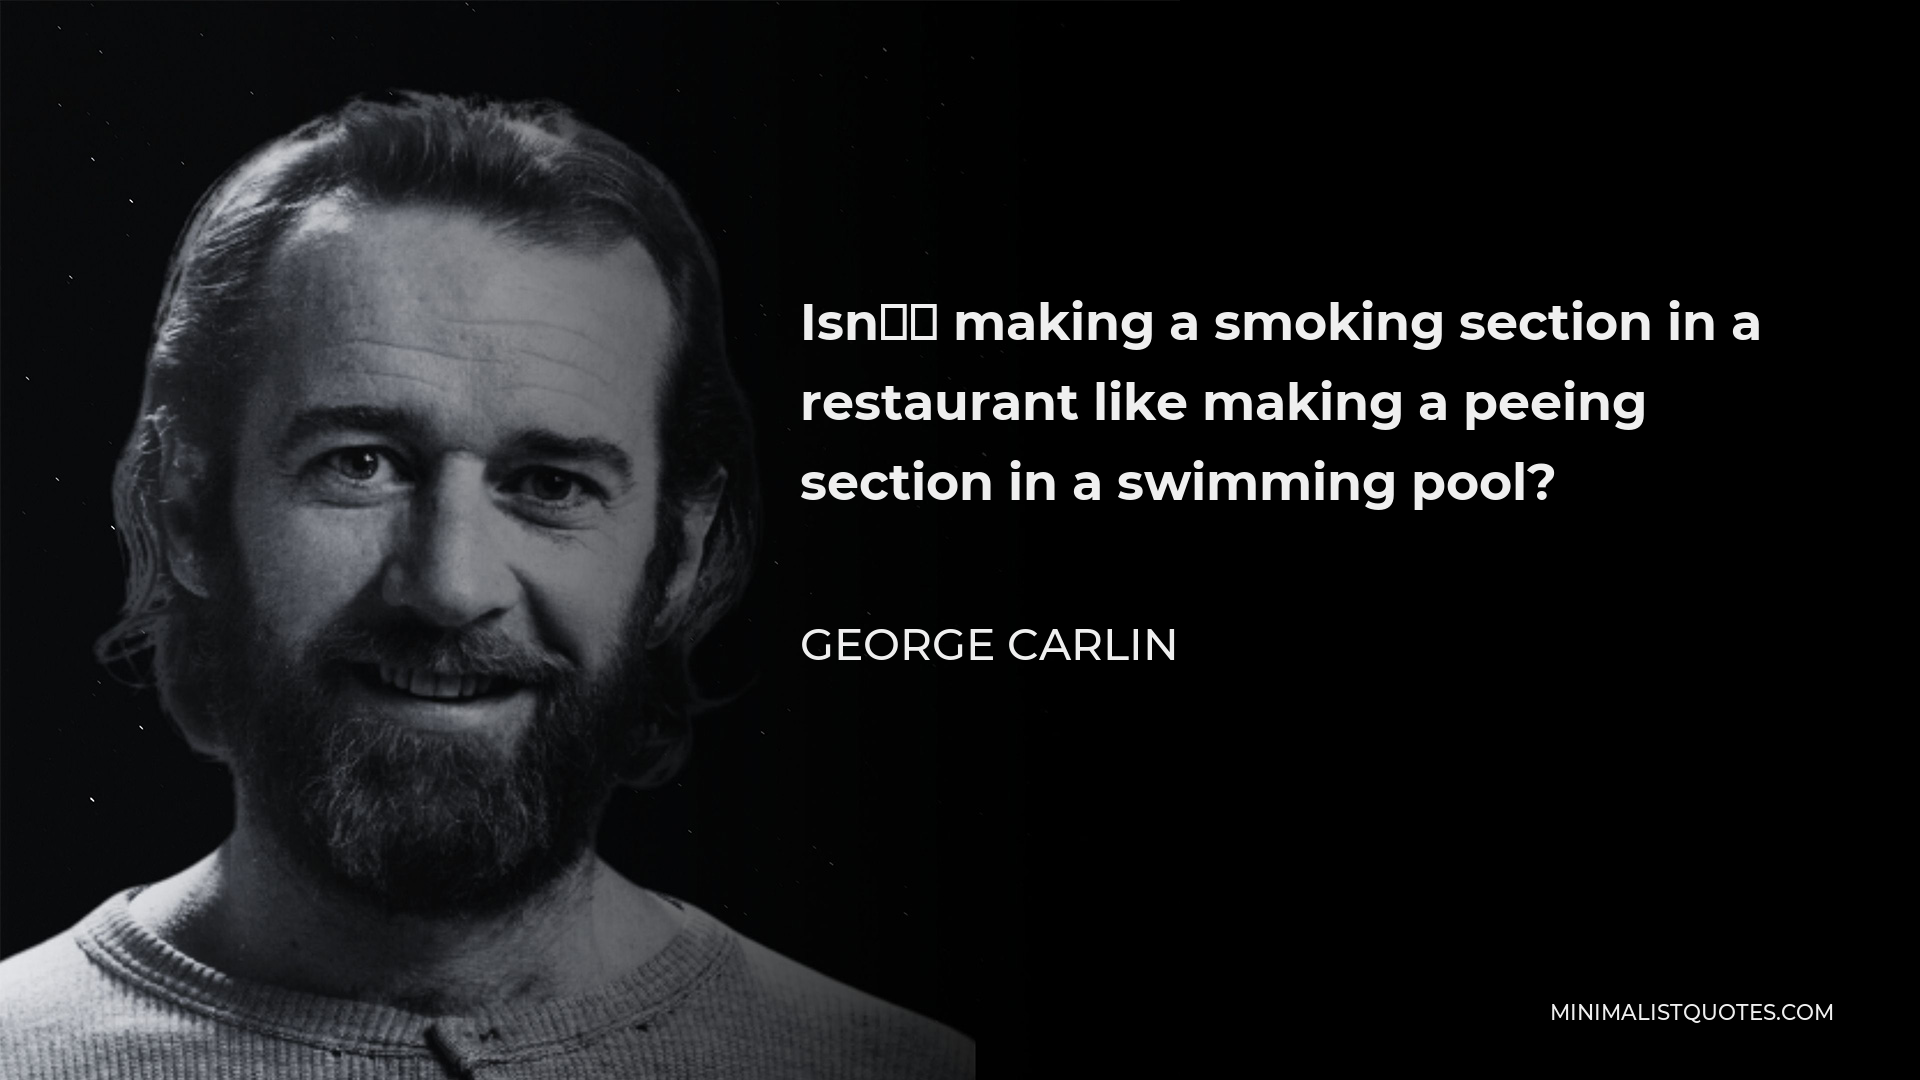 George Carlin Quote - Isn’t making a smoking section in a restaurant like making a peeing section in a swimming pool?